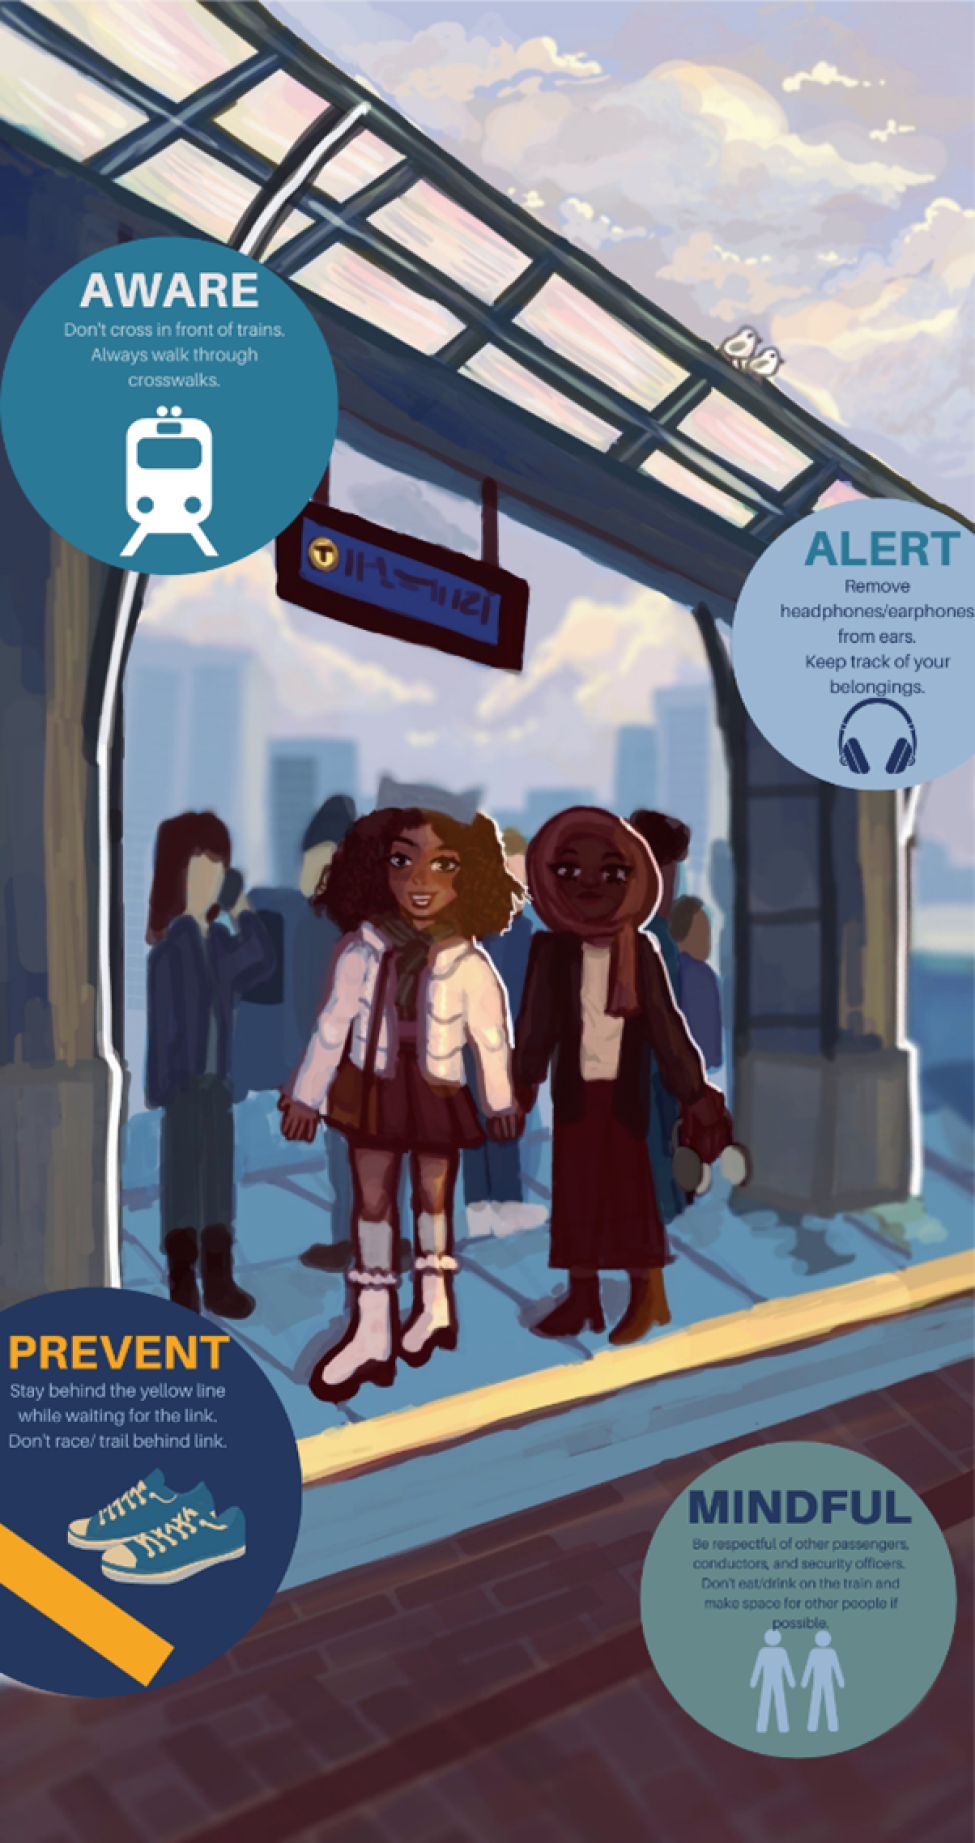 An art piece showing two people on a train platform with safety tips in text bubbles